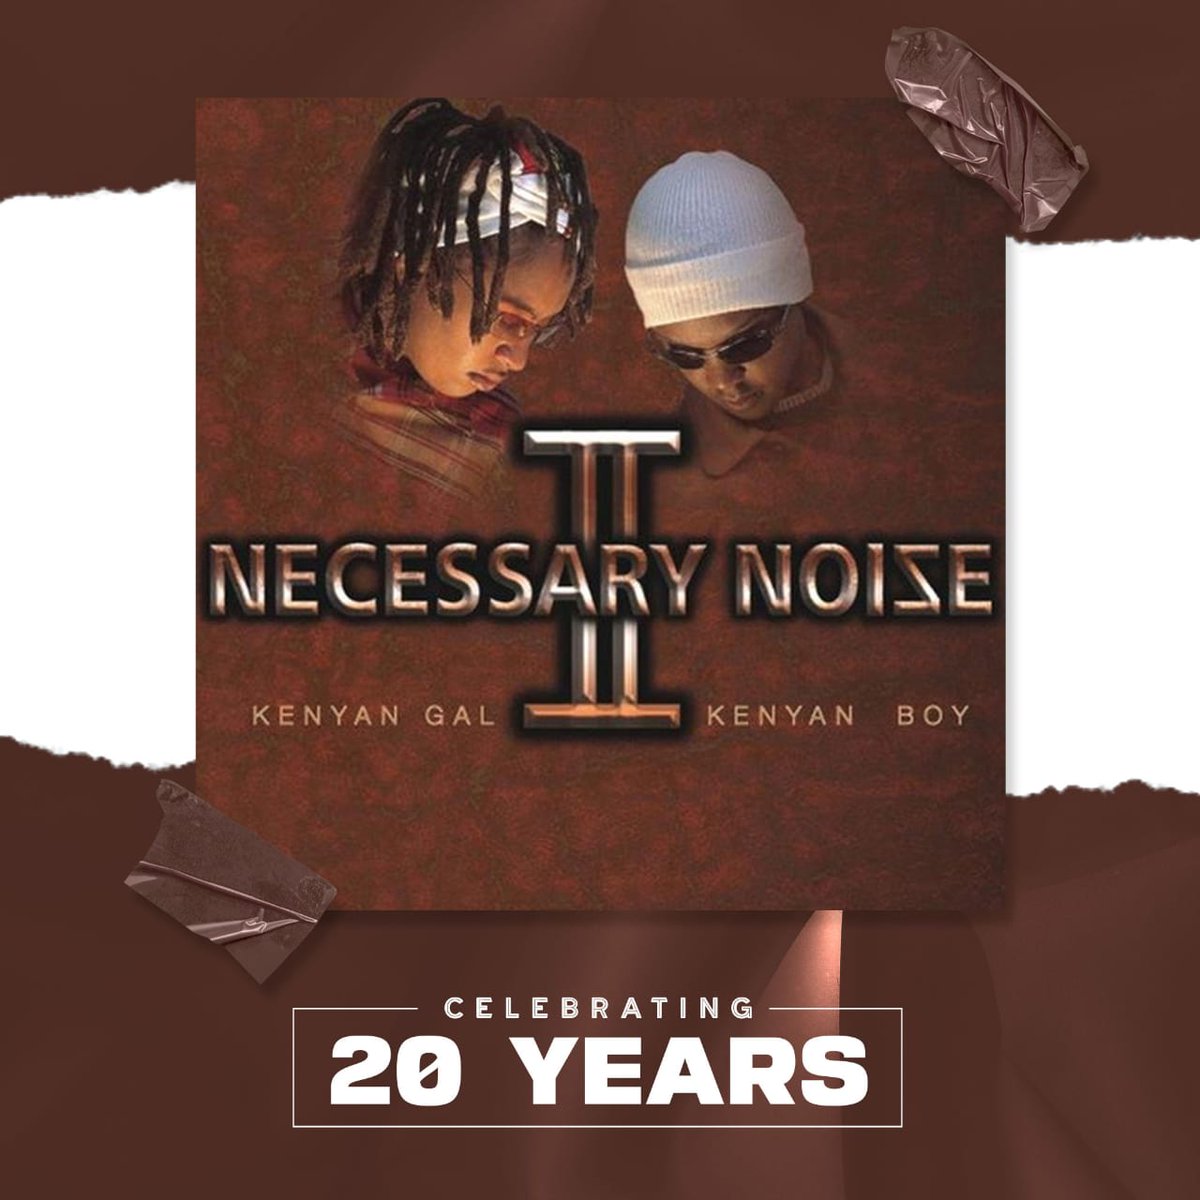 Kenyan Gal Kenyan Boy album by @NoizeNecessary just turned 20years old!! Such an honour to work with @NaziziHirji and @Teddjosiah on this project.